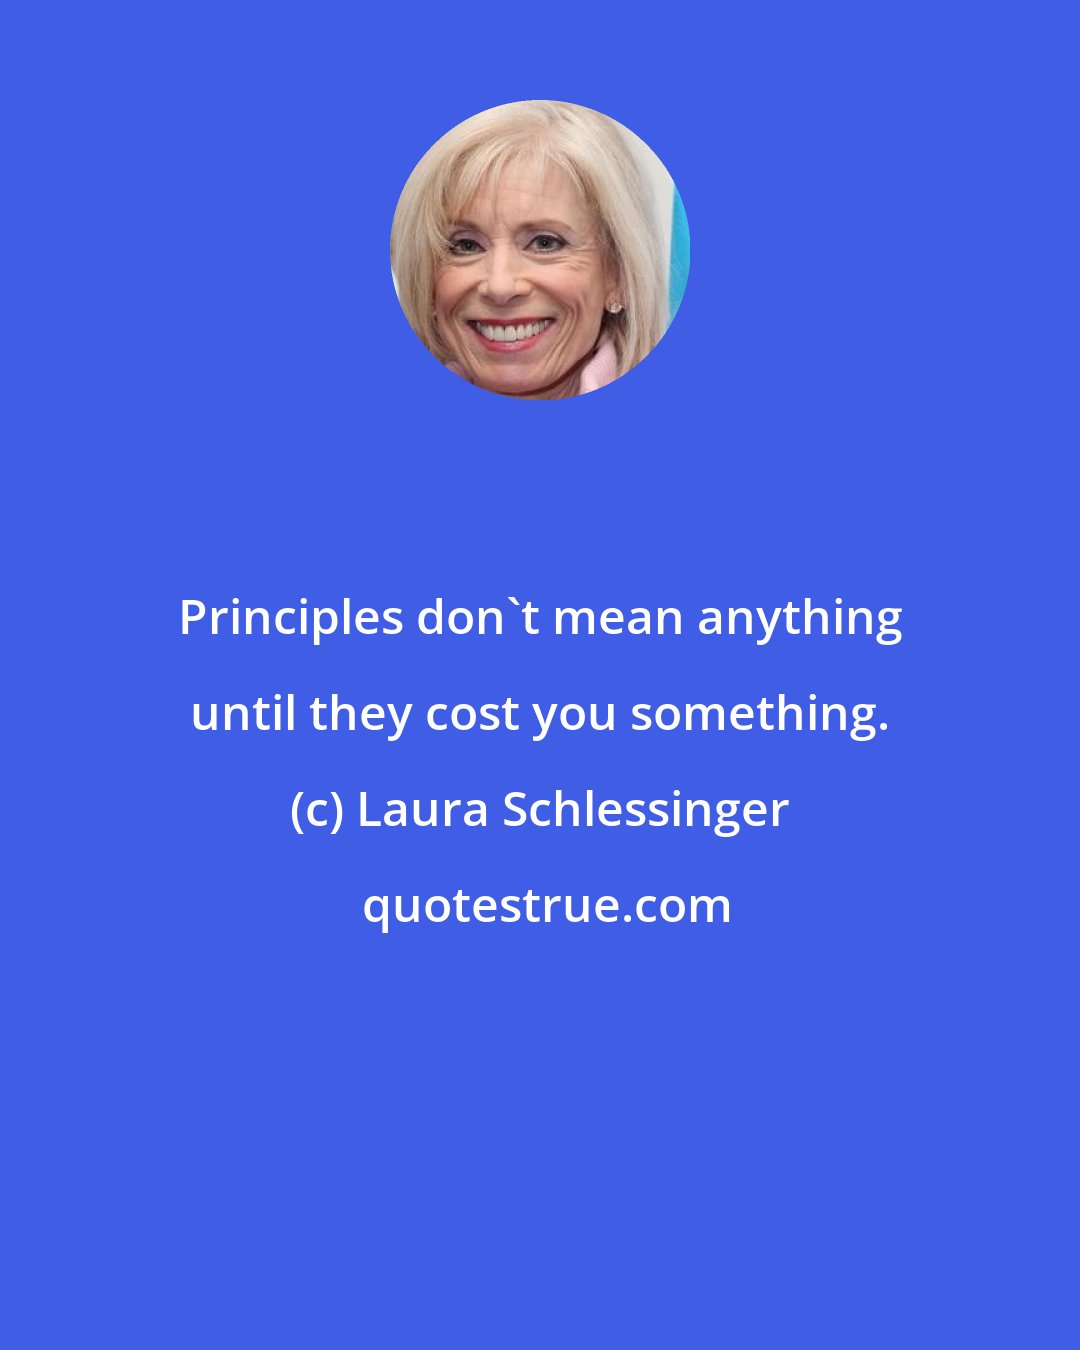 Laura Schlessinger: Principles don't mean anything until they cost you something.